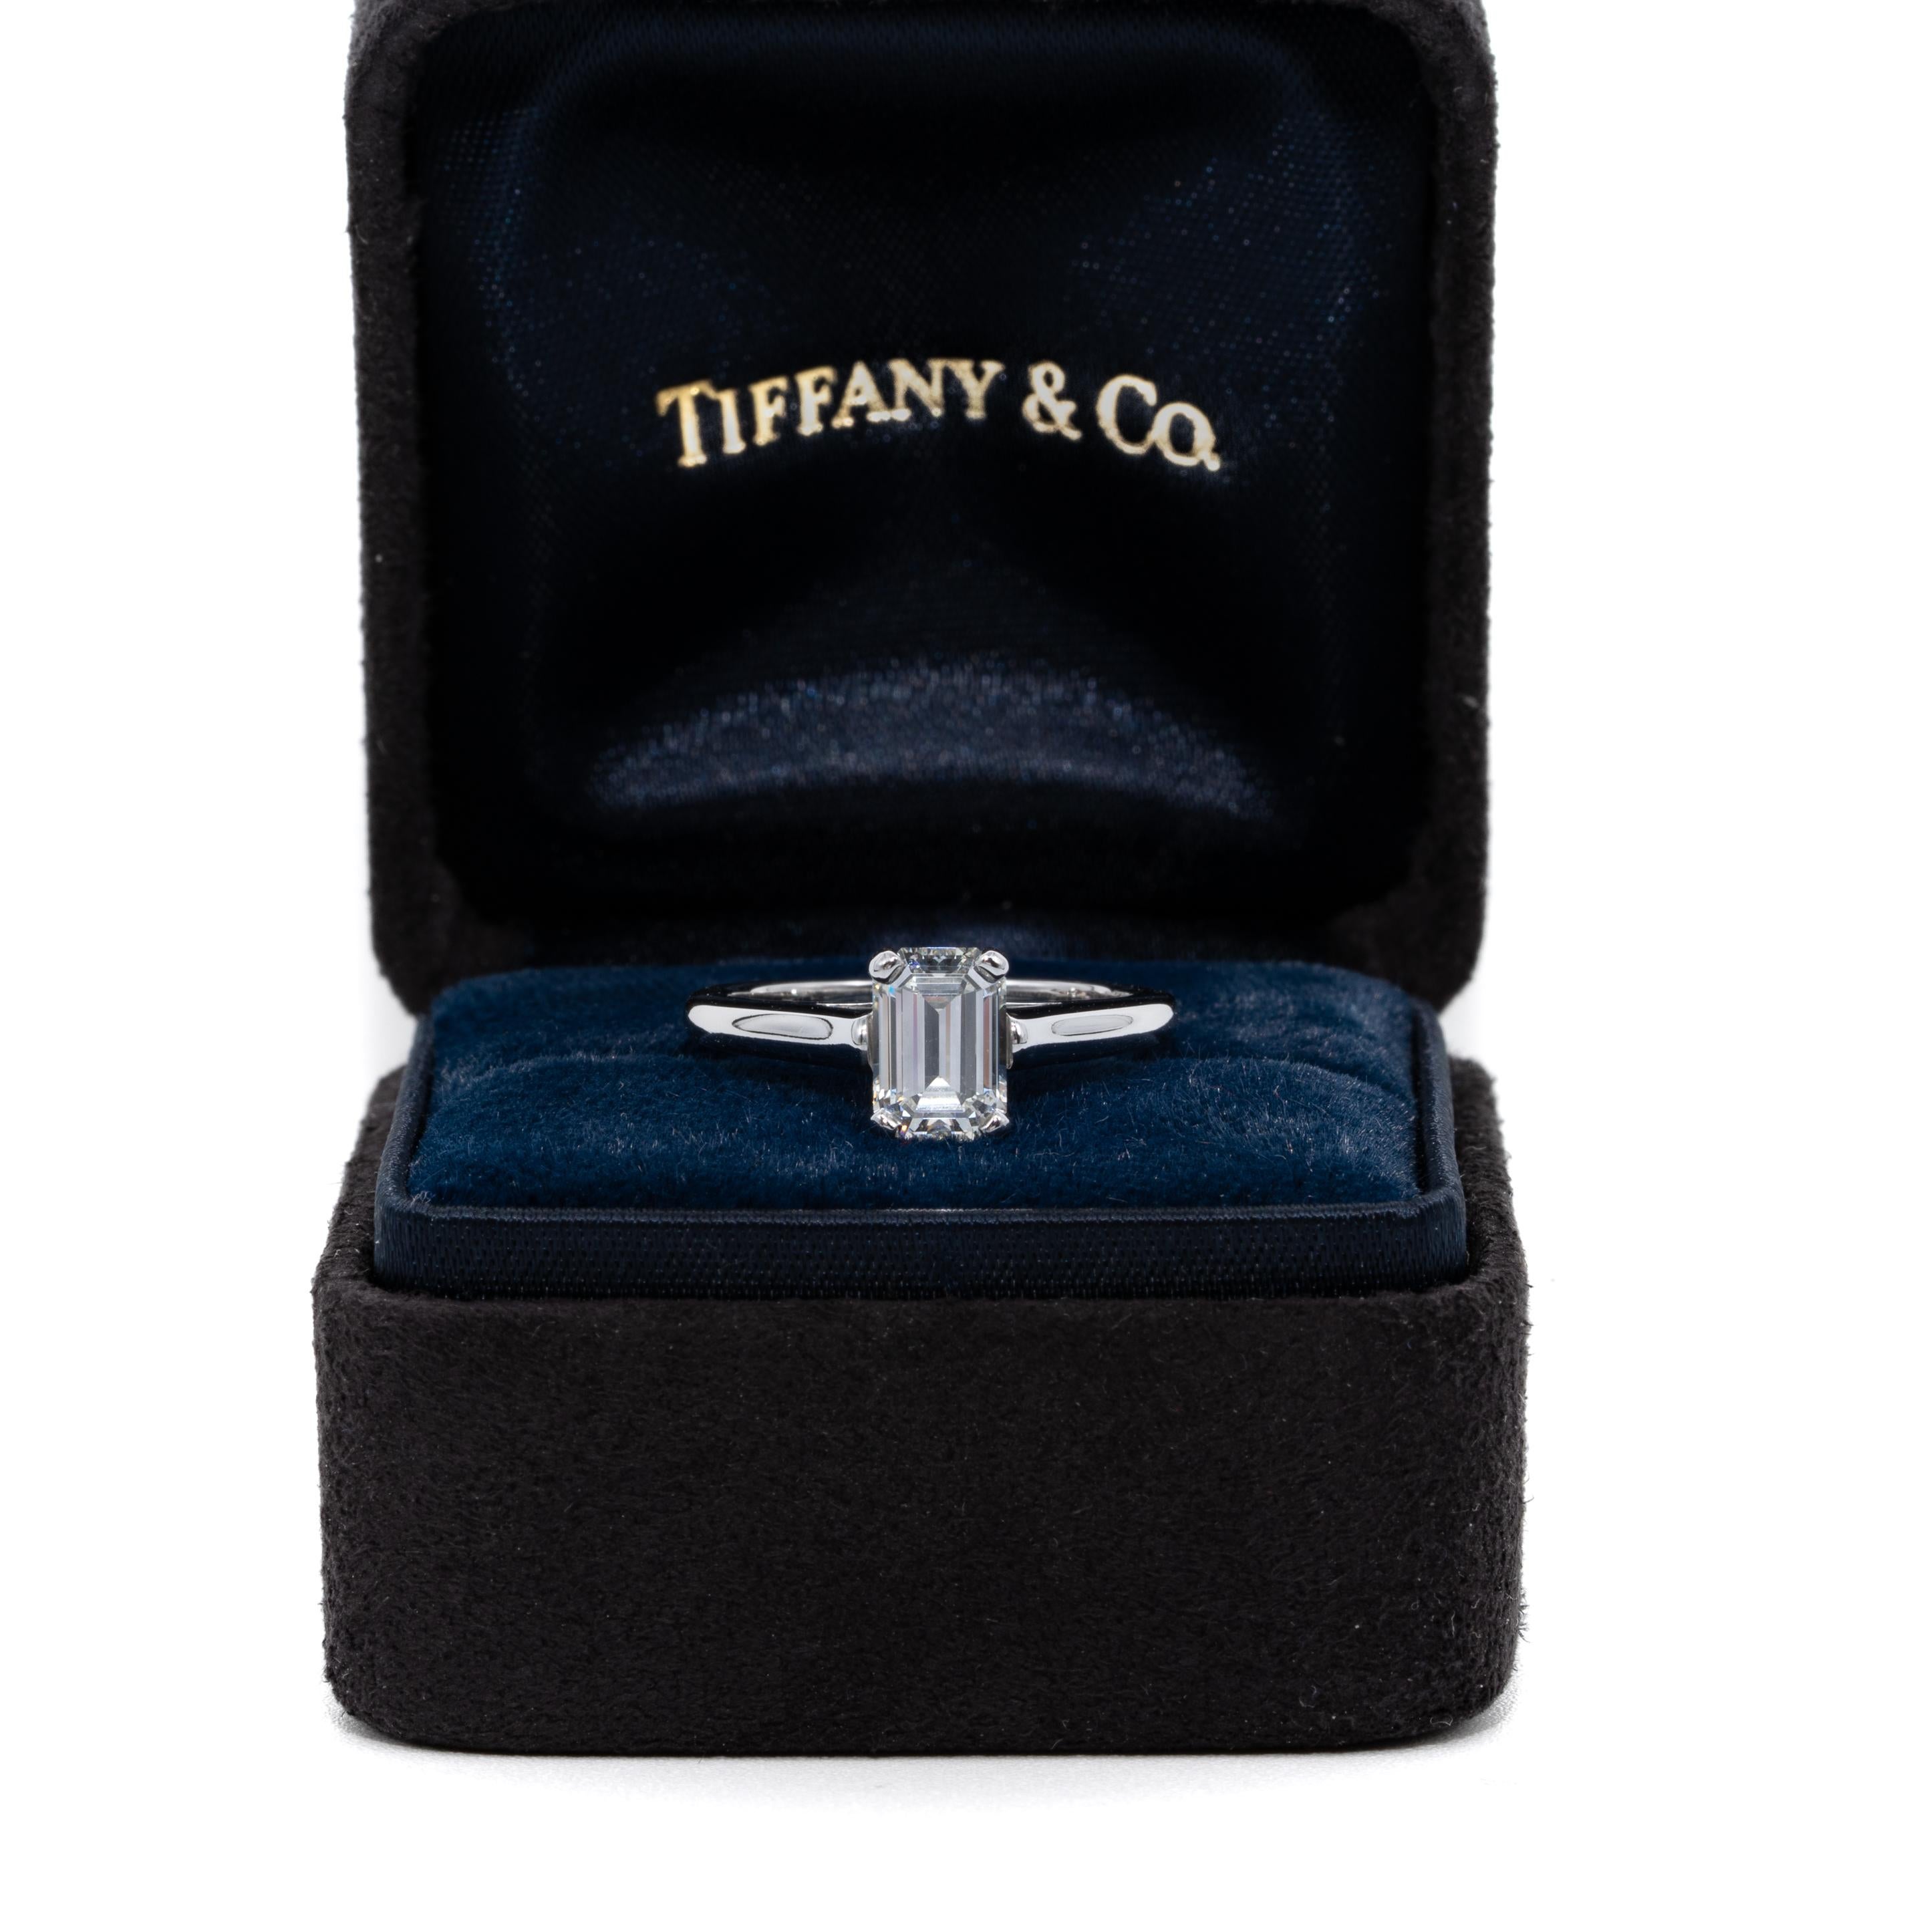 Contemporary Tiffany & Co. Engagement Ring with 1.07 Carat Emerald Cut Centre in Platinum